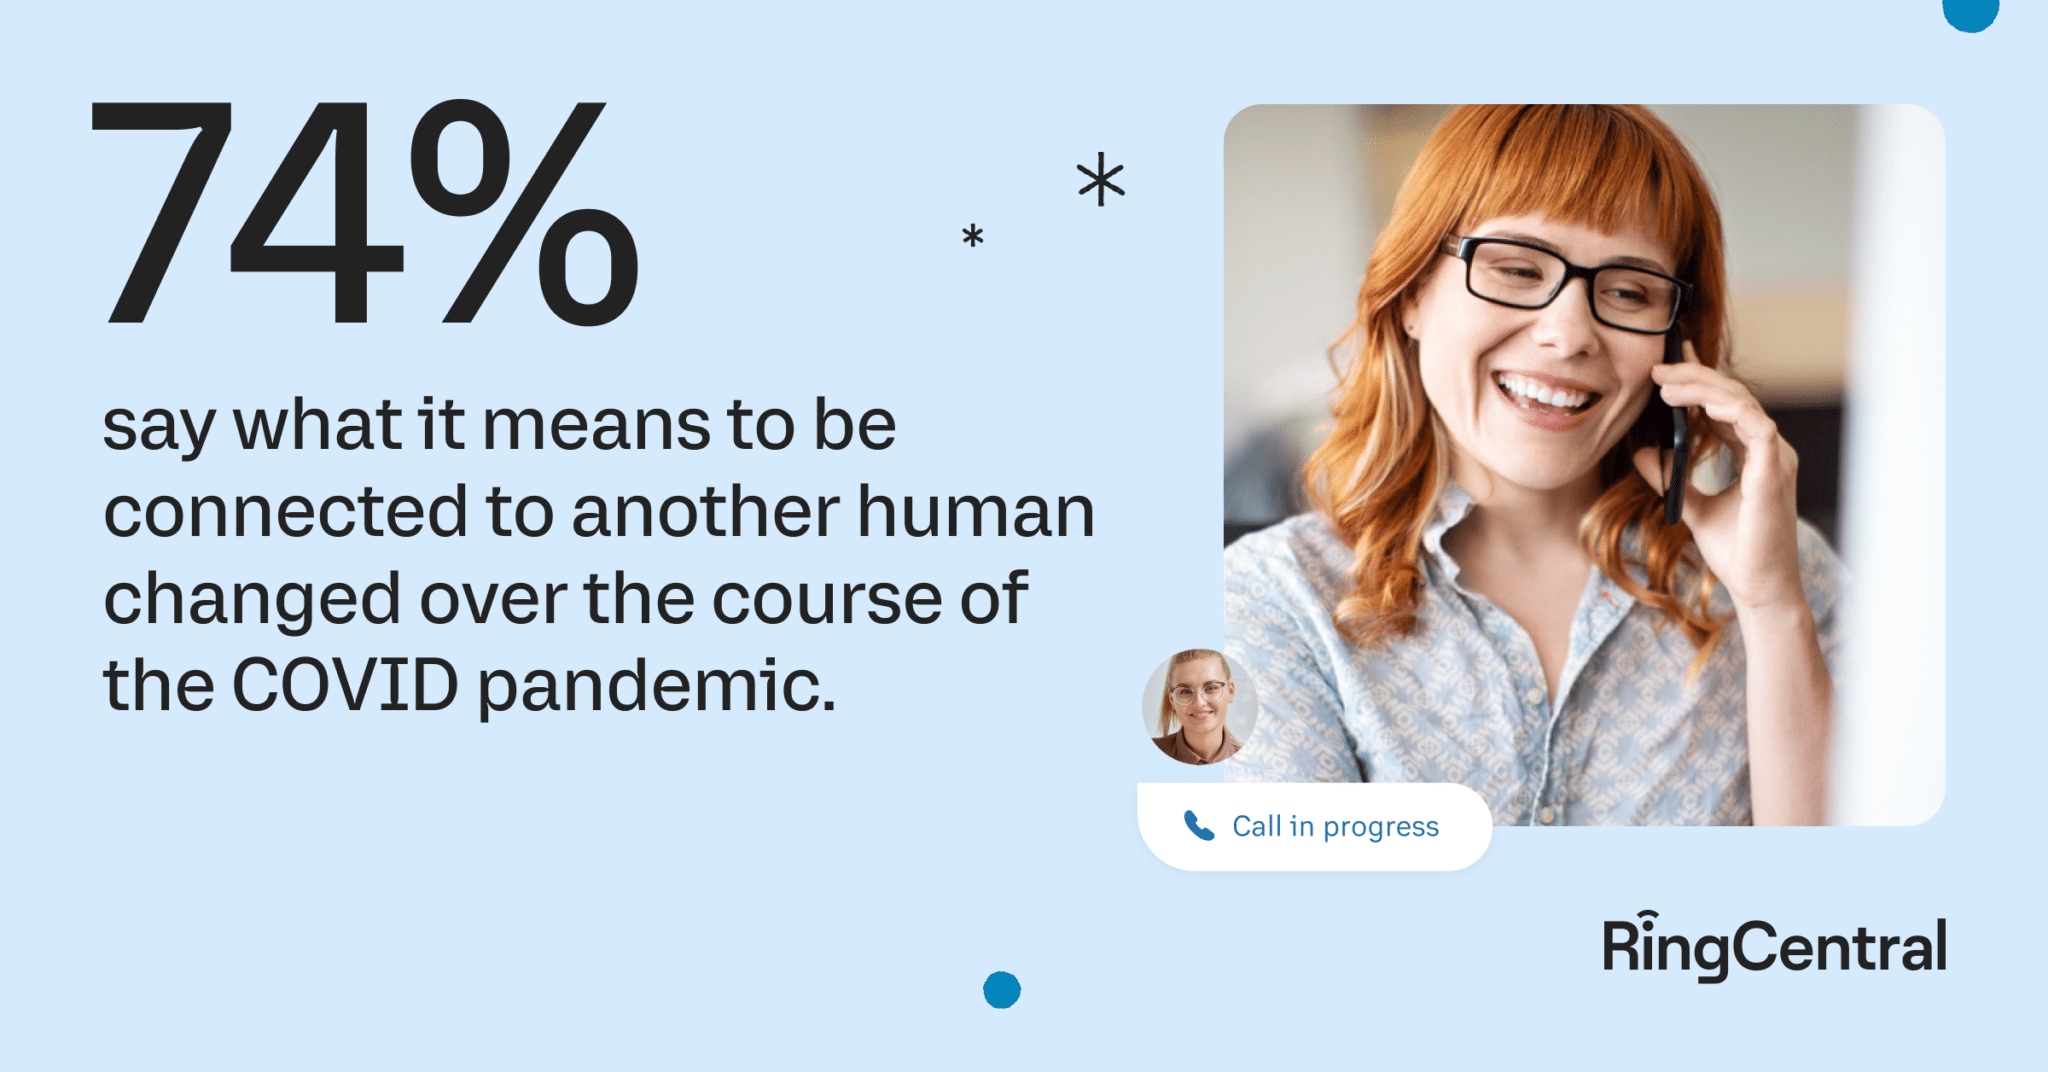 state of human connections report 74% say what it means to be connected to another human changed over the course of the COVID pandemic.